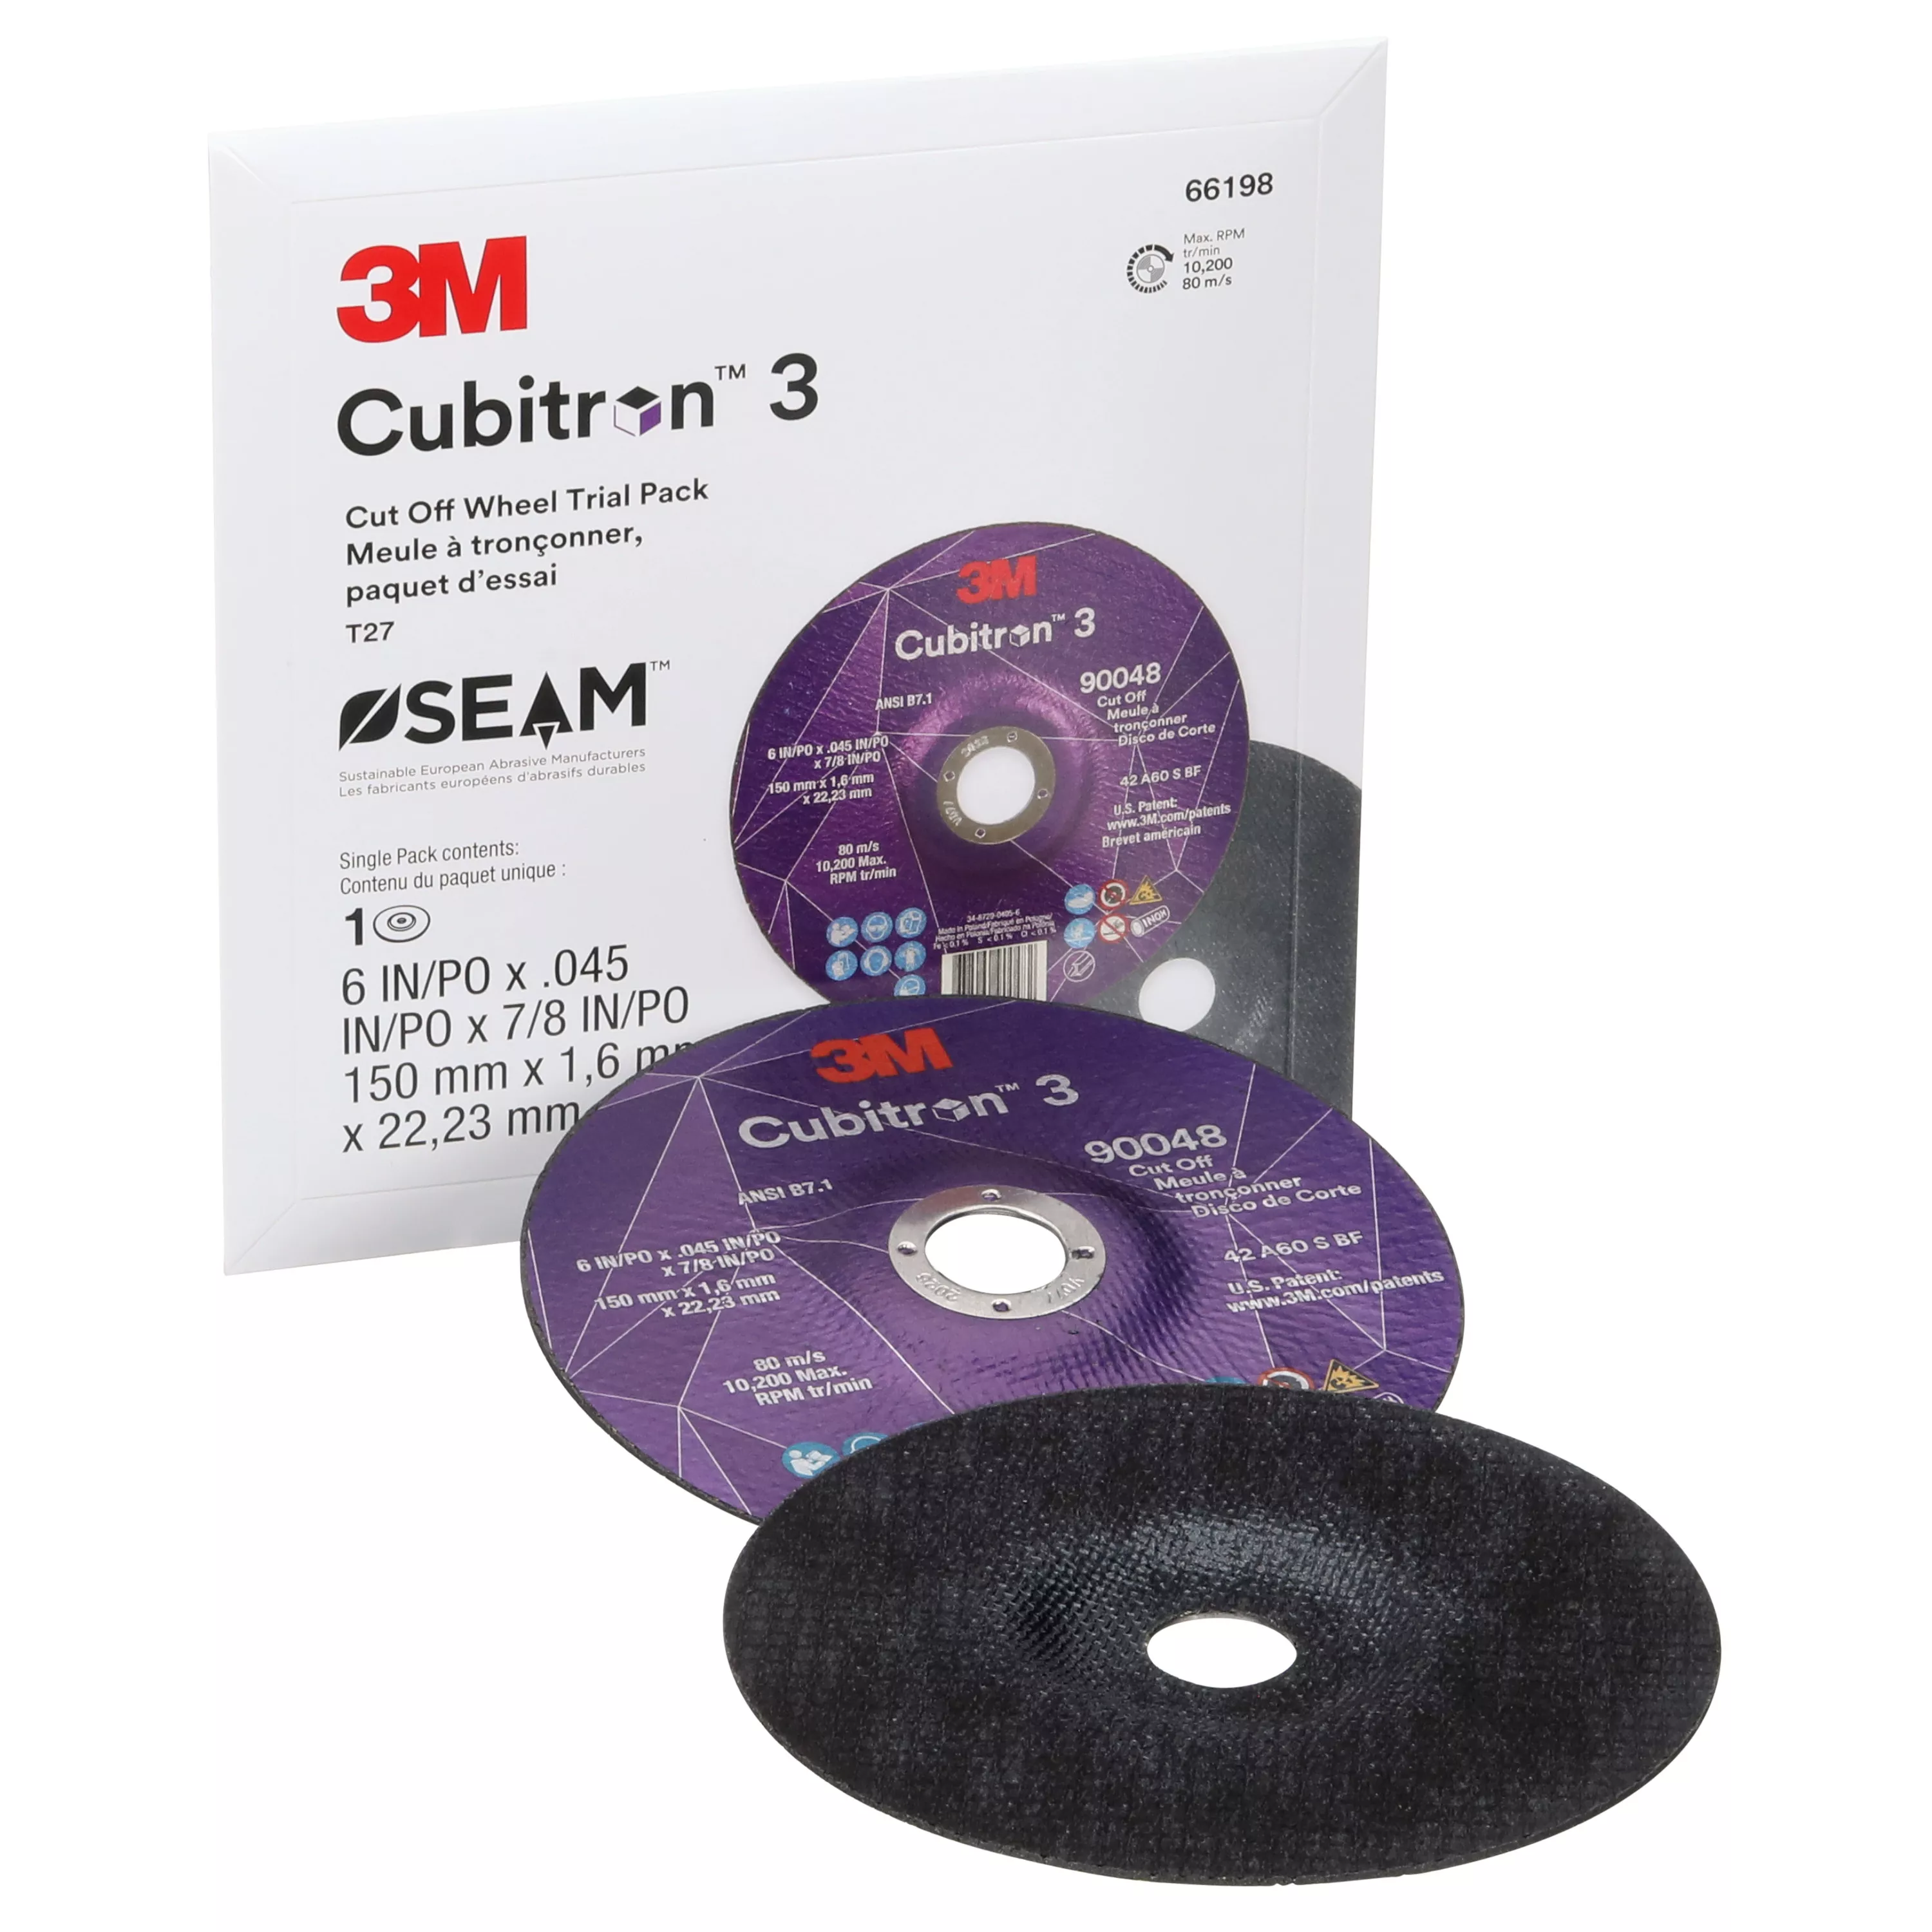 3M™ Cubitron™ 3 Cut-Off Wheel, 66198, 60+, Type 27, 6 in x 0.045 in x 7/8 in (150mmx1.6mmx22.23mm), ANSI, 10 ea/Case, Trial Pack